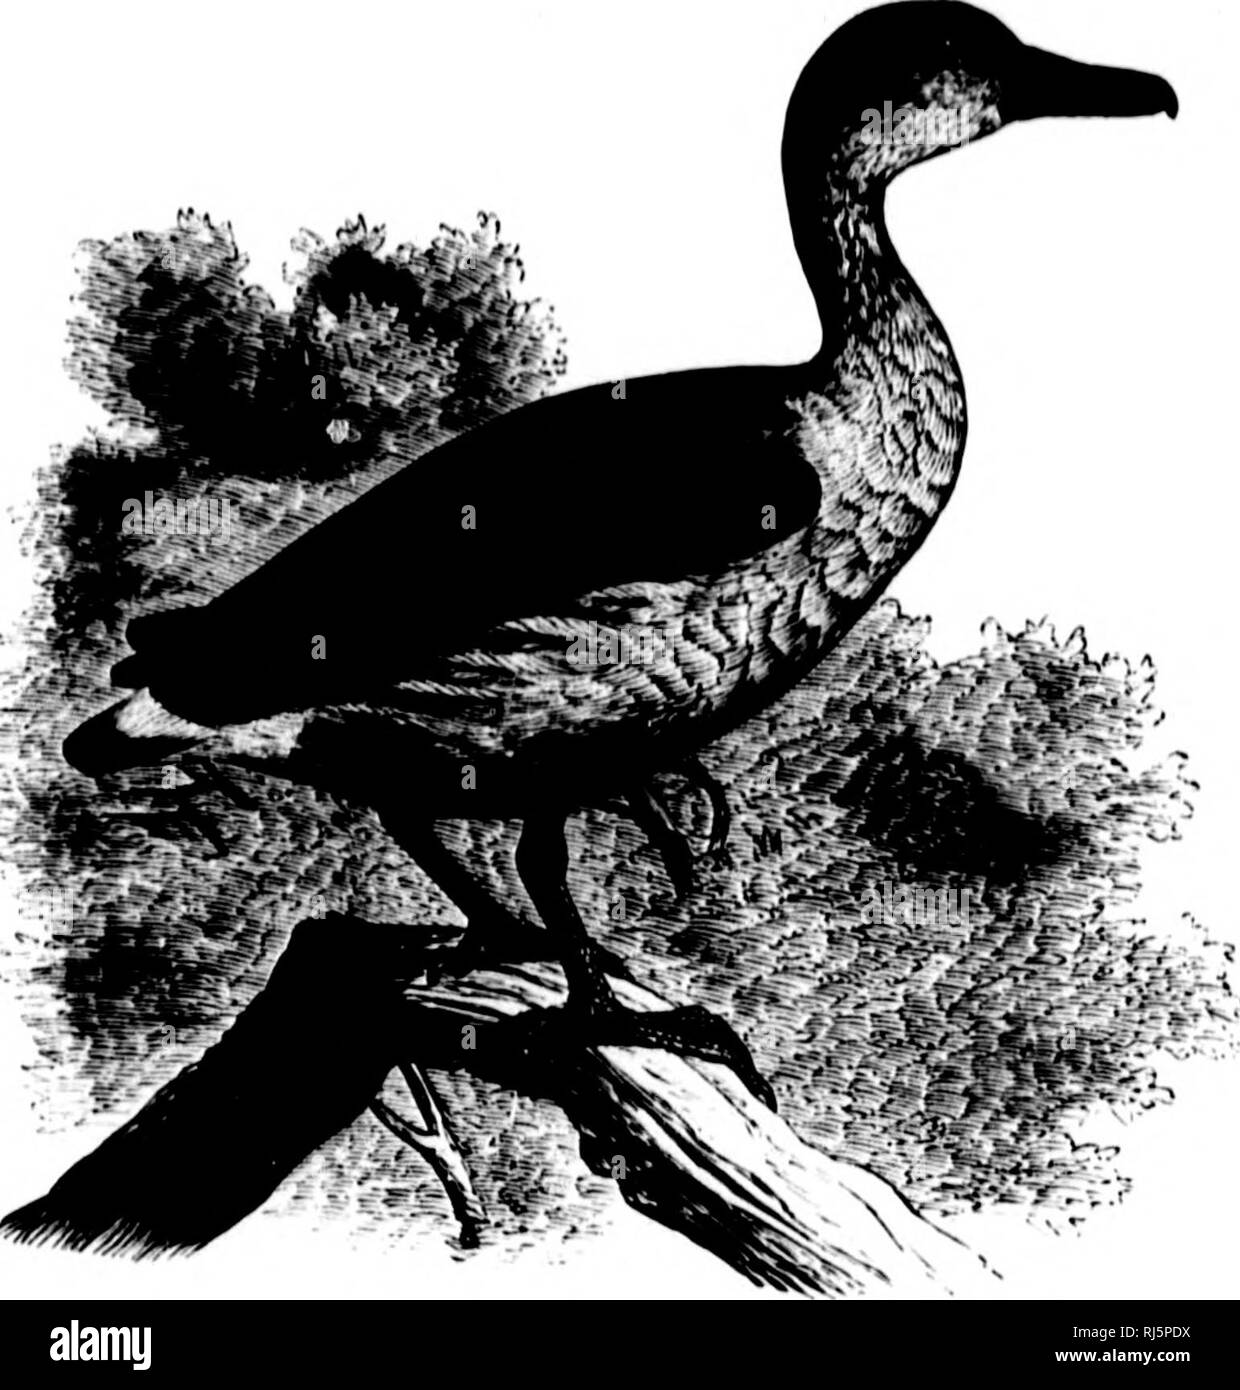 . The water birds of North America [microform]. Birds; Water-birds; Oiseaux; Oiseaux aquatiques. 480 LAMKLLIUOSTUAL SWIMMEUB — ANSERKS. A&gt; ('ri«sum wliite, Hjiotted with black. 1. D. arborea.' Aliovu, iliill brown, tlio feathers tipped with lighter; neck Htreiiked with pale rulvoiis mill dusky ; lower parts dull whitish, irregularly spotted with black. Jlah. West Indies (Jiiiniiica and St. Croix). 2. D. autumualis. Above, reddish brown, the rump and upper tail-coverts black ; abdomen, Hanks, siiies, and under side of winj,', black. n. autuiniiiiliii. Lower jiart of mrk all round, including  Stock Photo